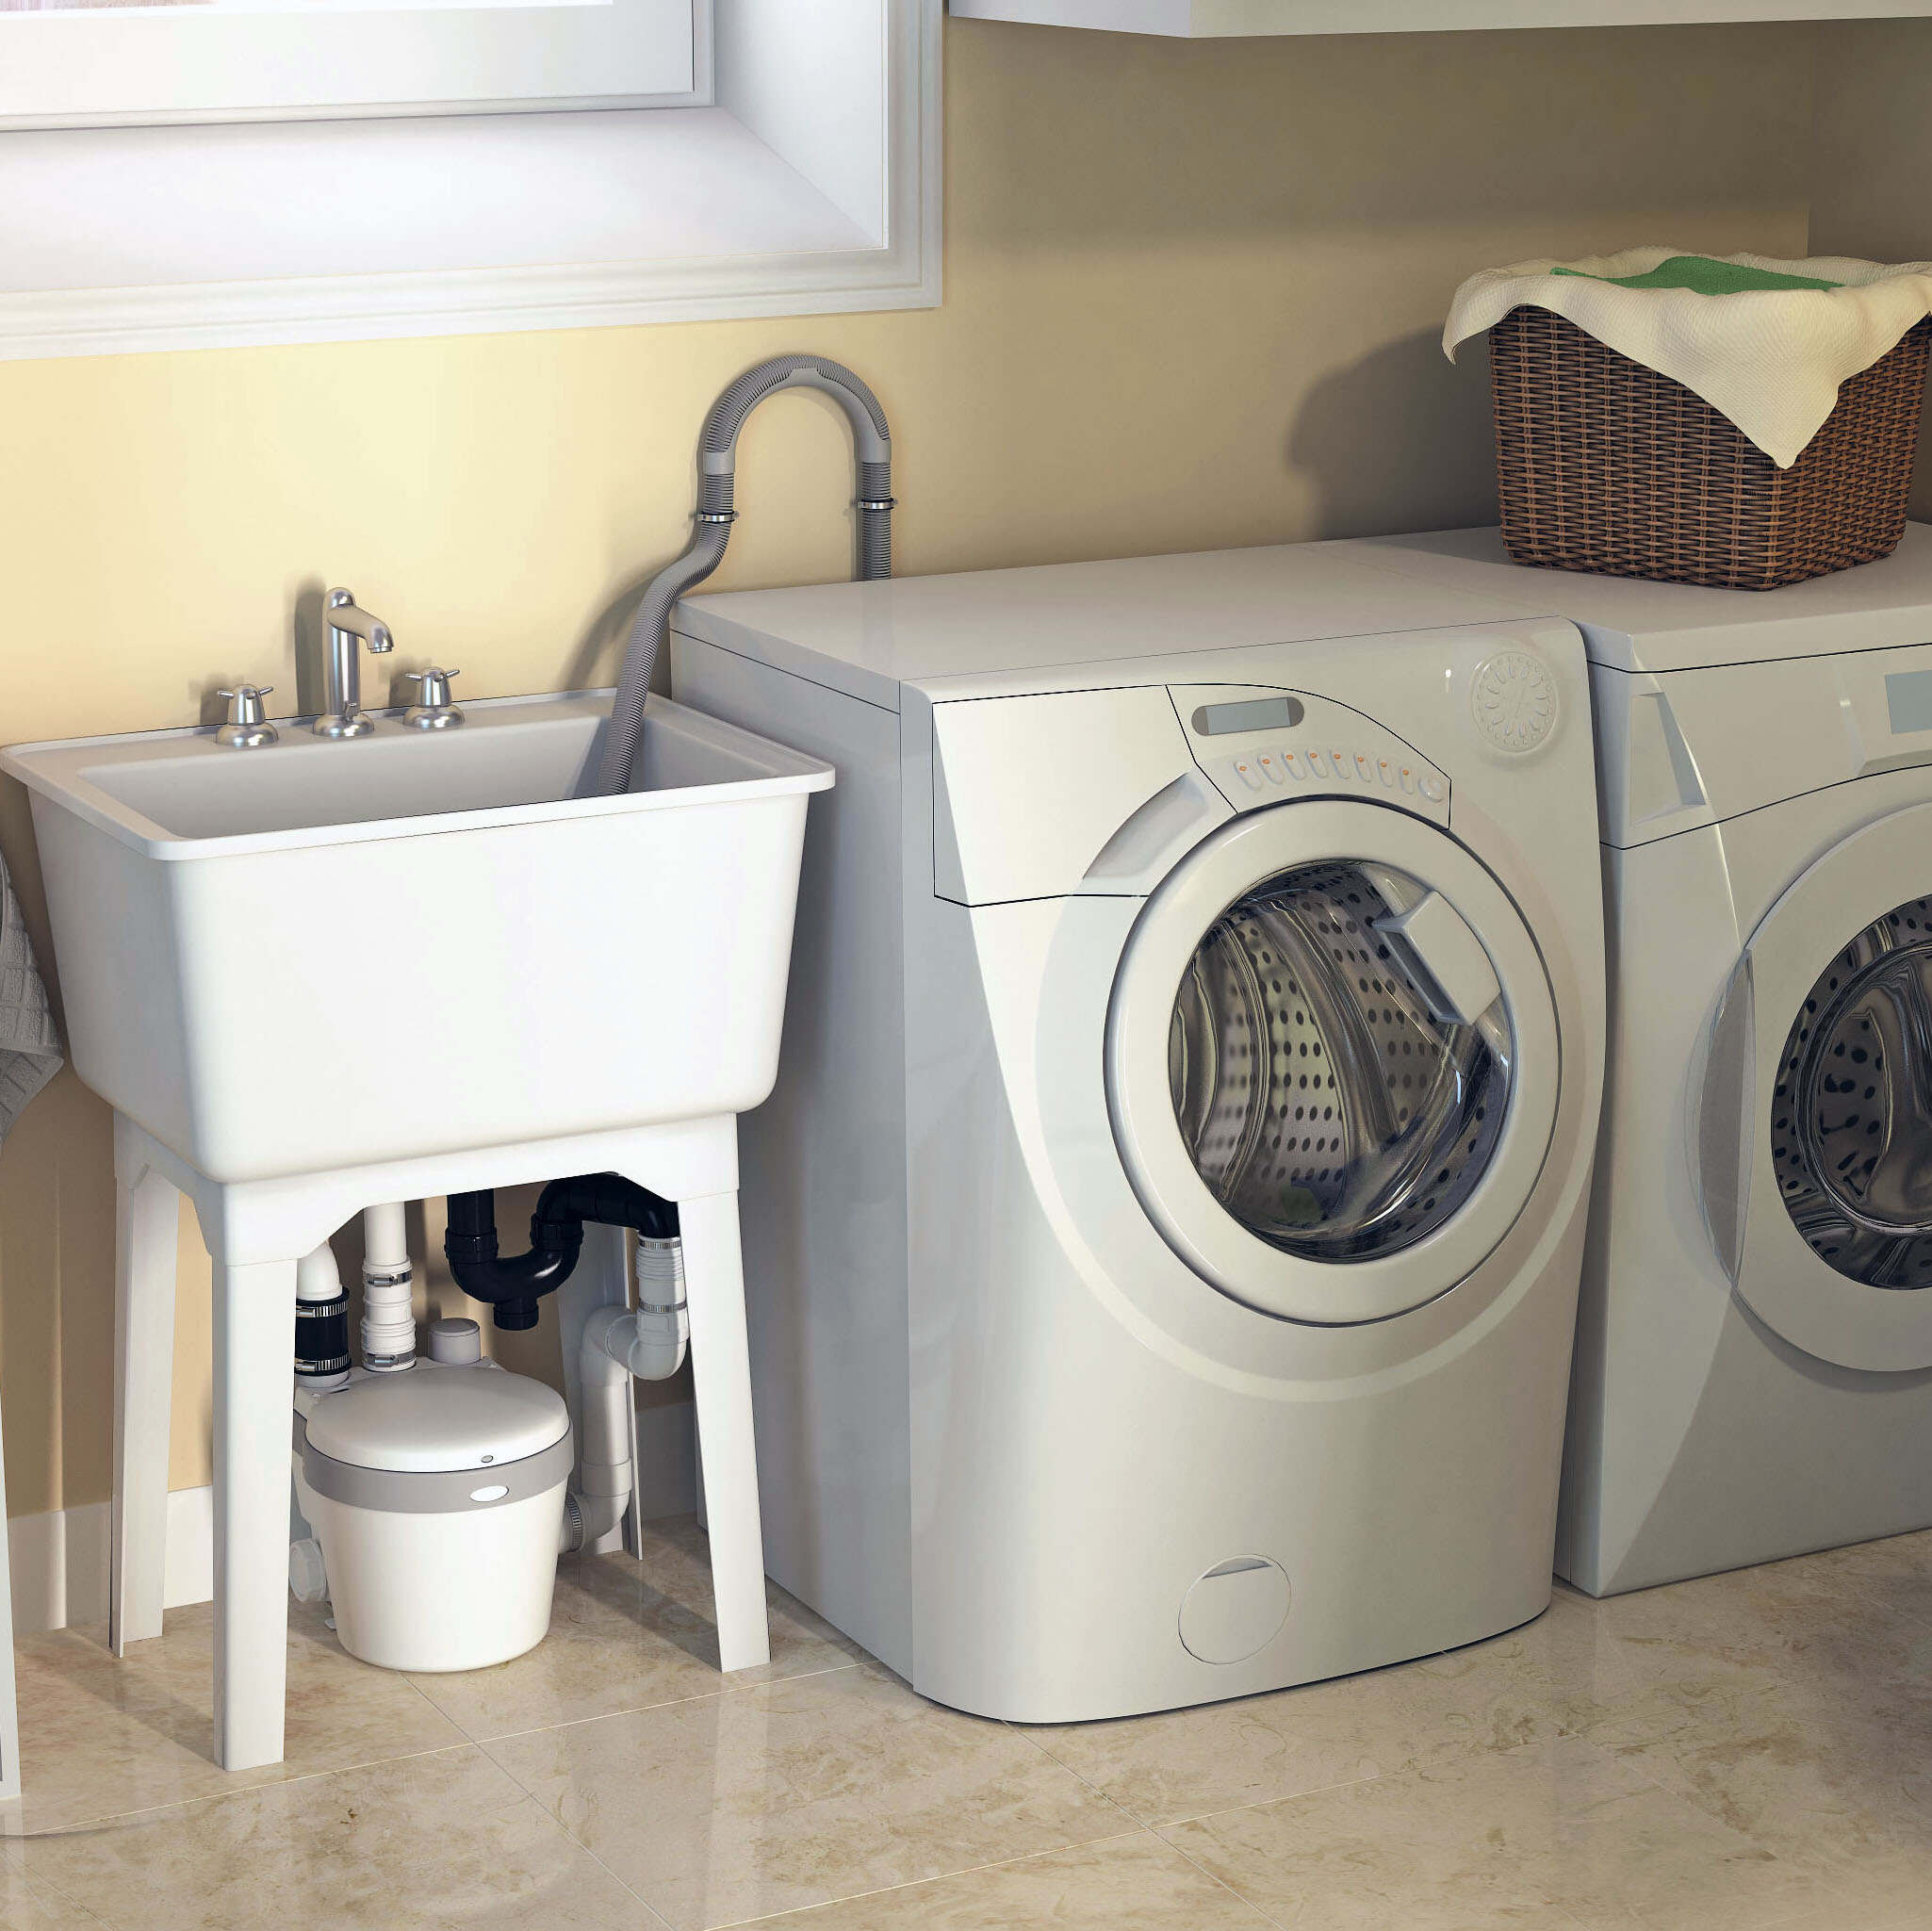 How To Install Sink In Laundry Room